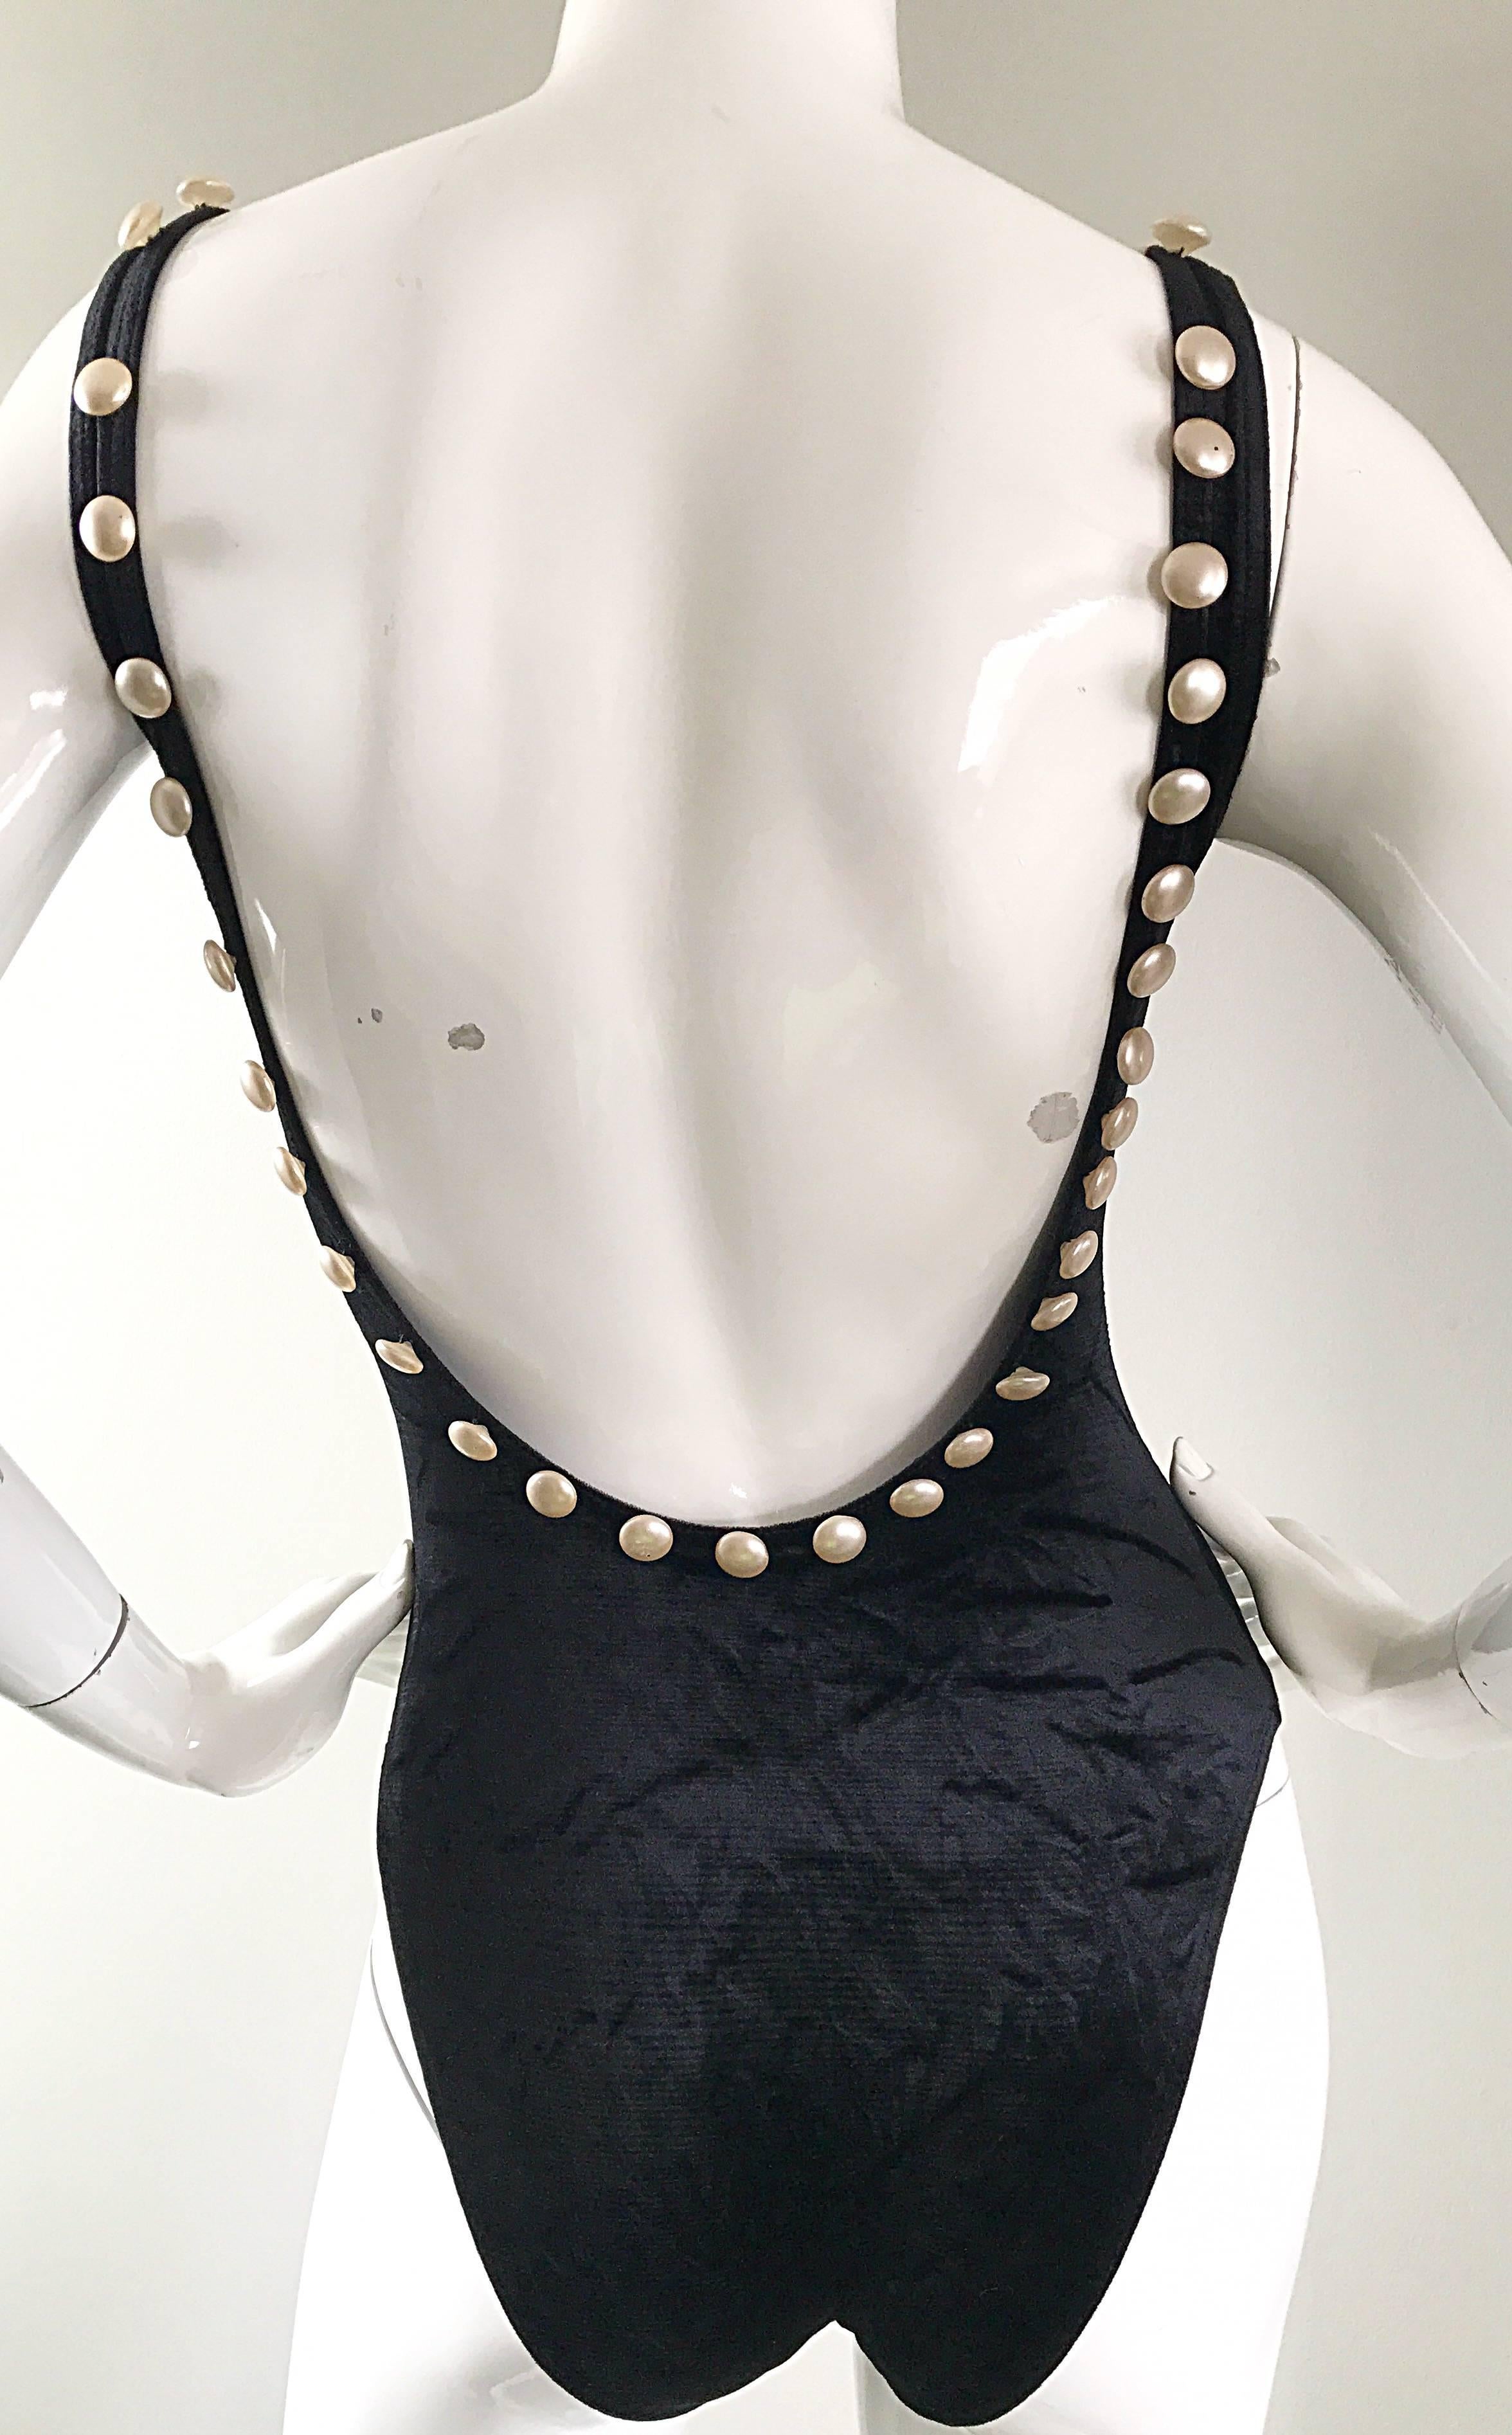 Women's Vintage Moschino 1990s Black and White Velour Pearl Encrusted Bodysuit Swimsuit For Sale